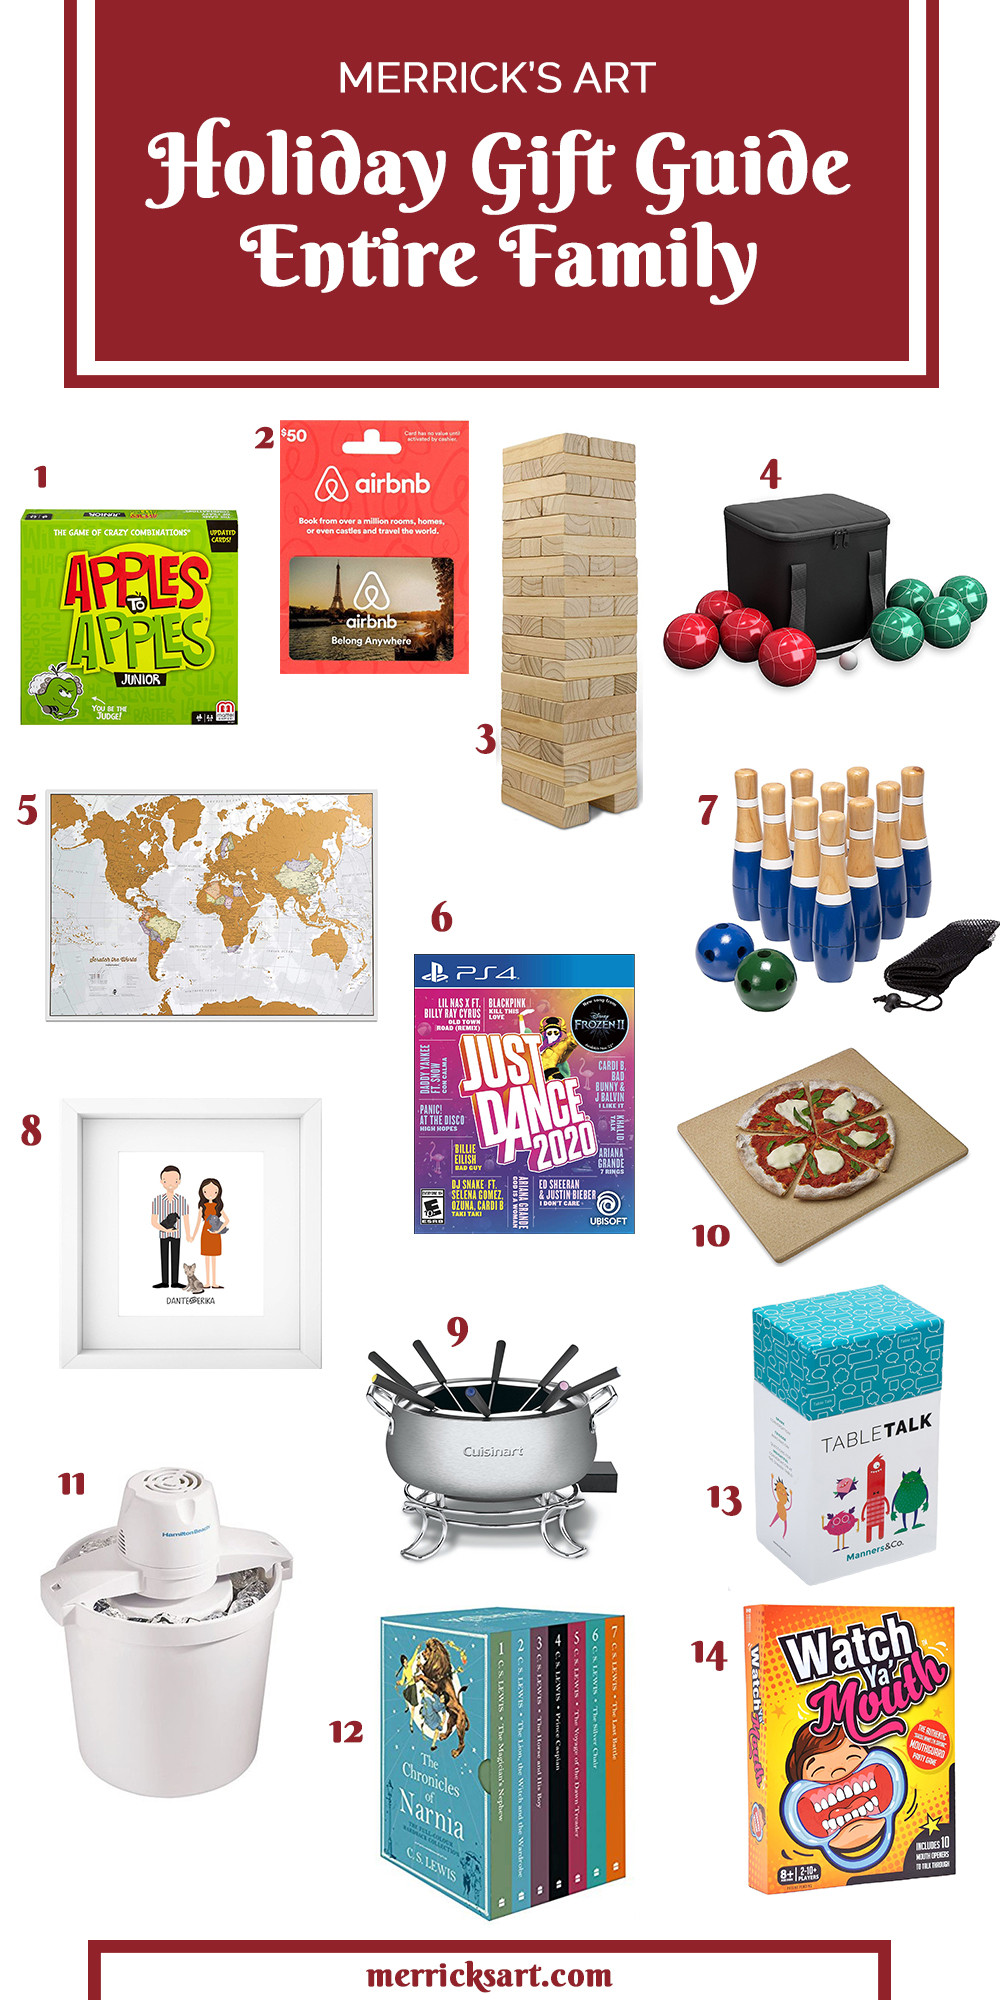 Holiday Gift Ideas For Families
 Family Christmas Gifts Ideas for an Entire Family